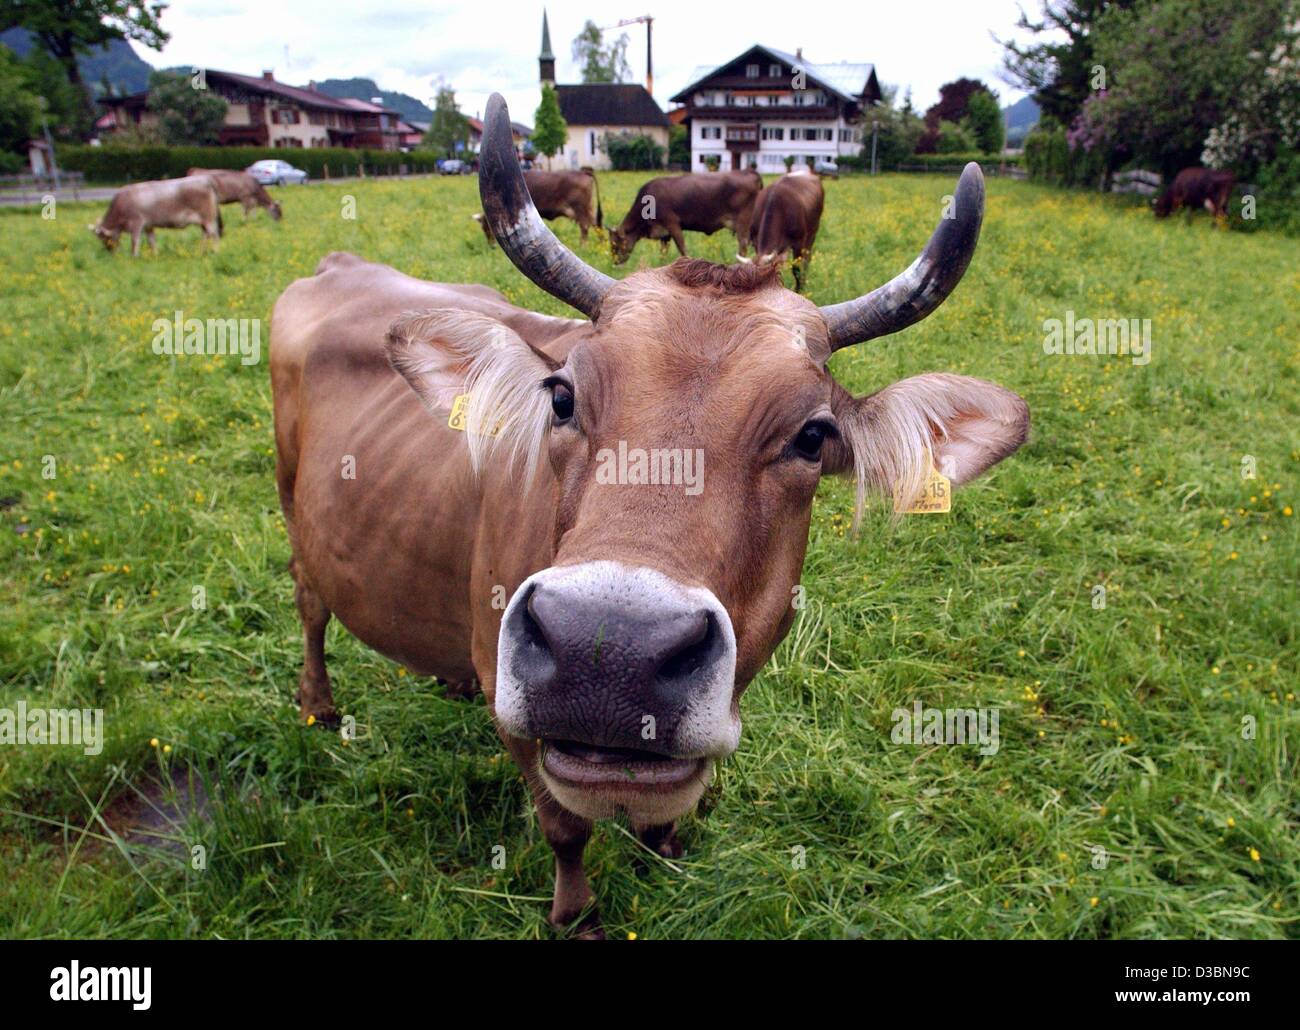 (dpa) - 'Hello Photographer' this nosey cow seems to be saying, Oberstdorf, Germany, 20 May 2003. Stock Photo